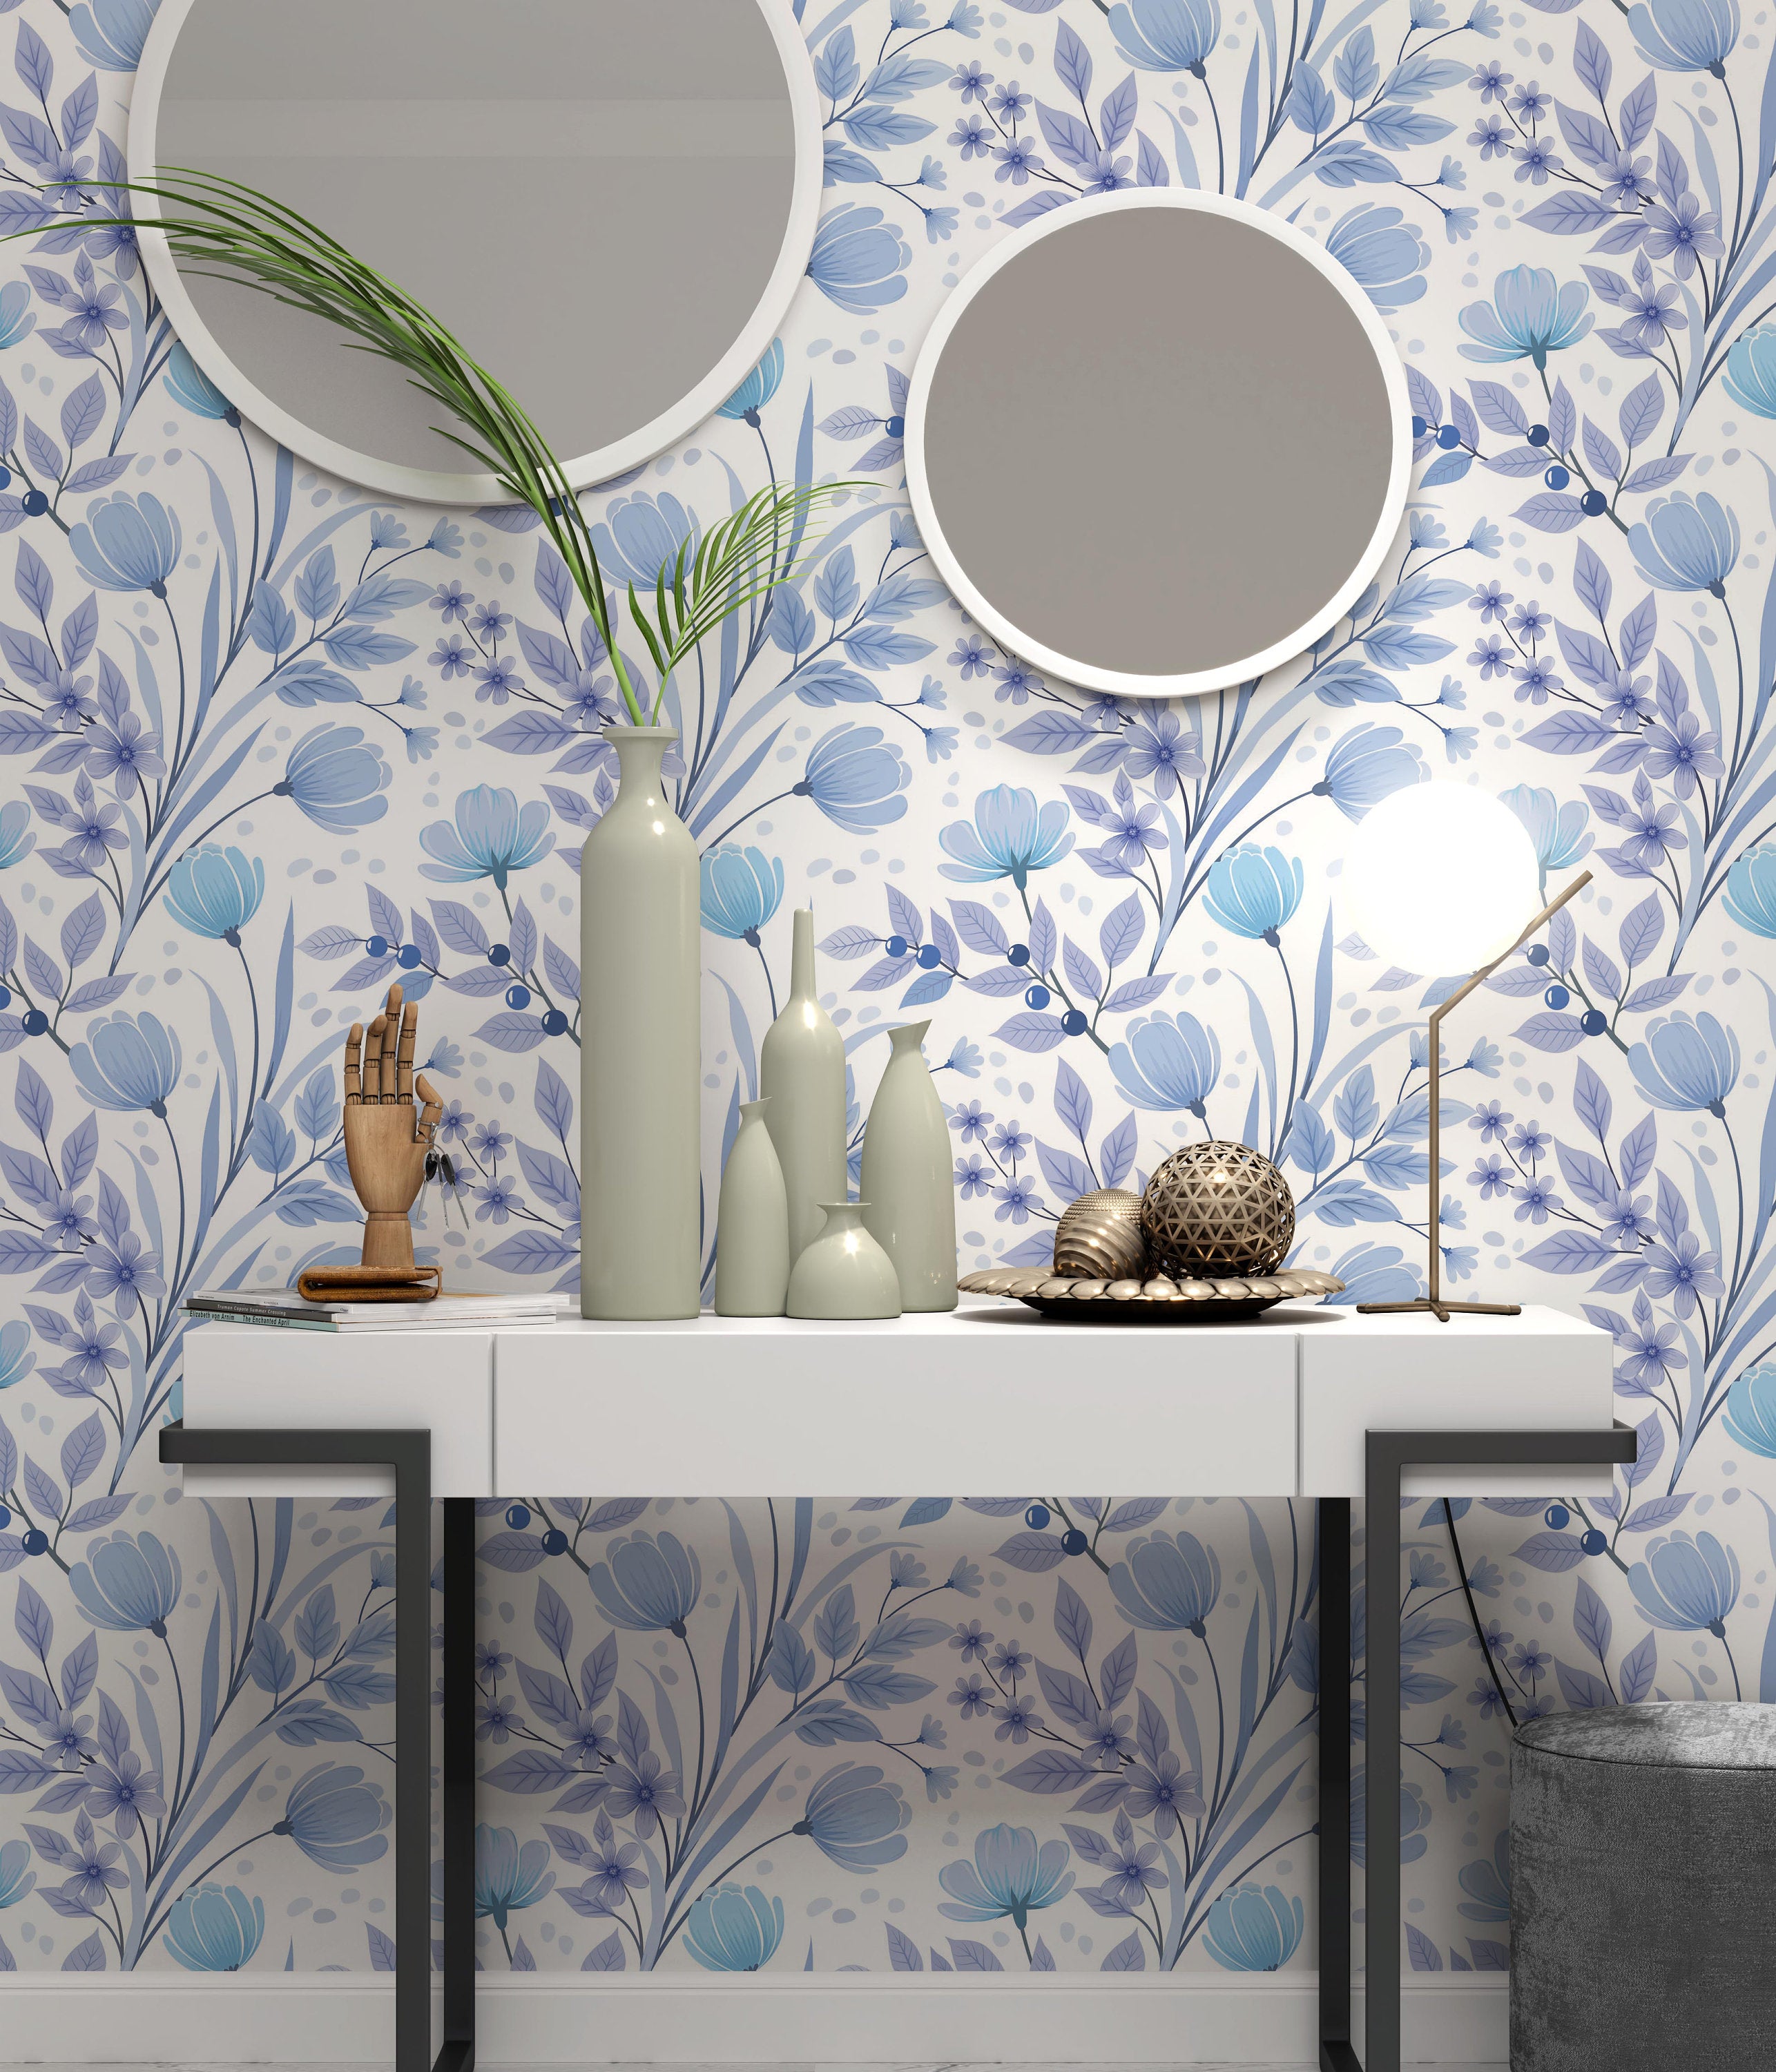 Floral Pattern on Blue Monochrome Background Wallpaper Self Adhesive Peel and Stick Wall Sticker Wall Decoration Removable